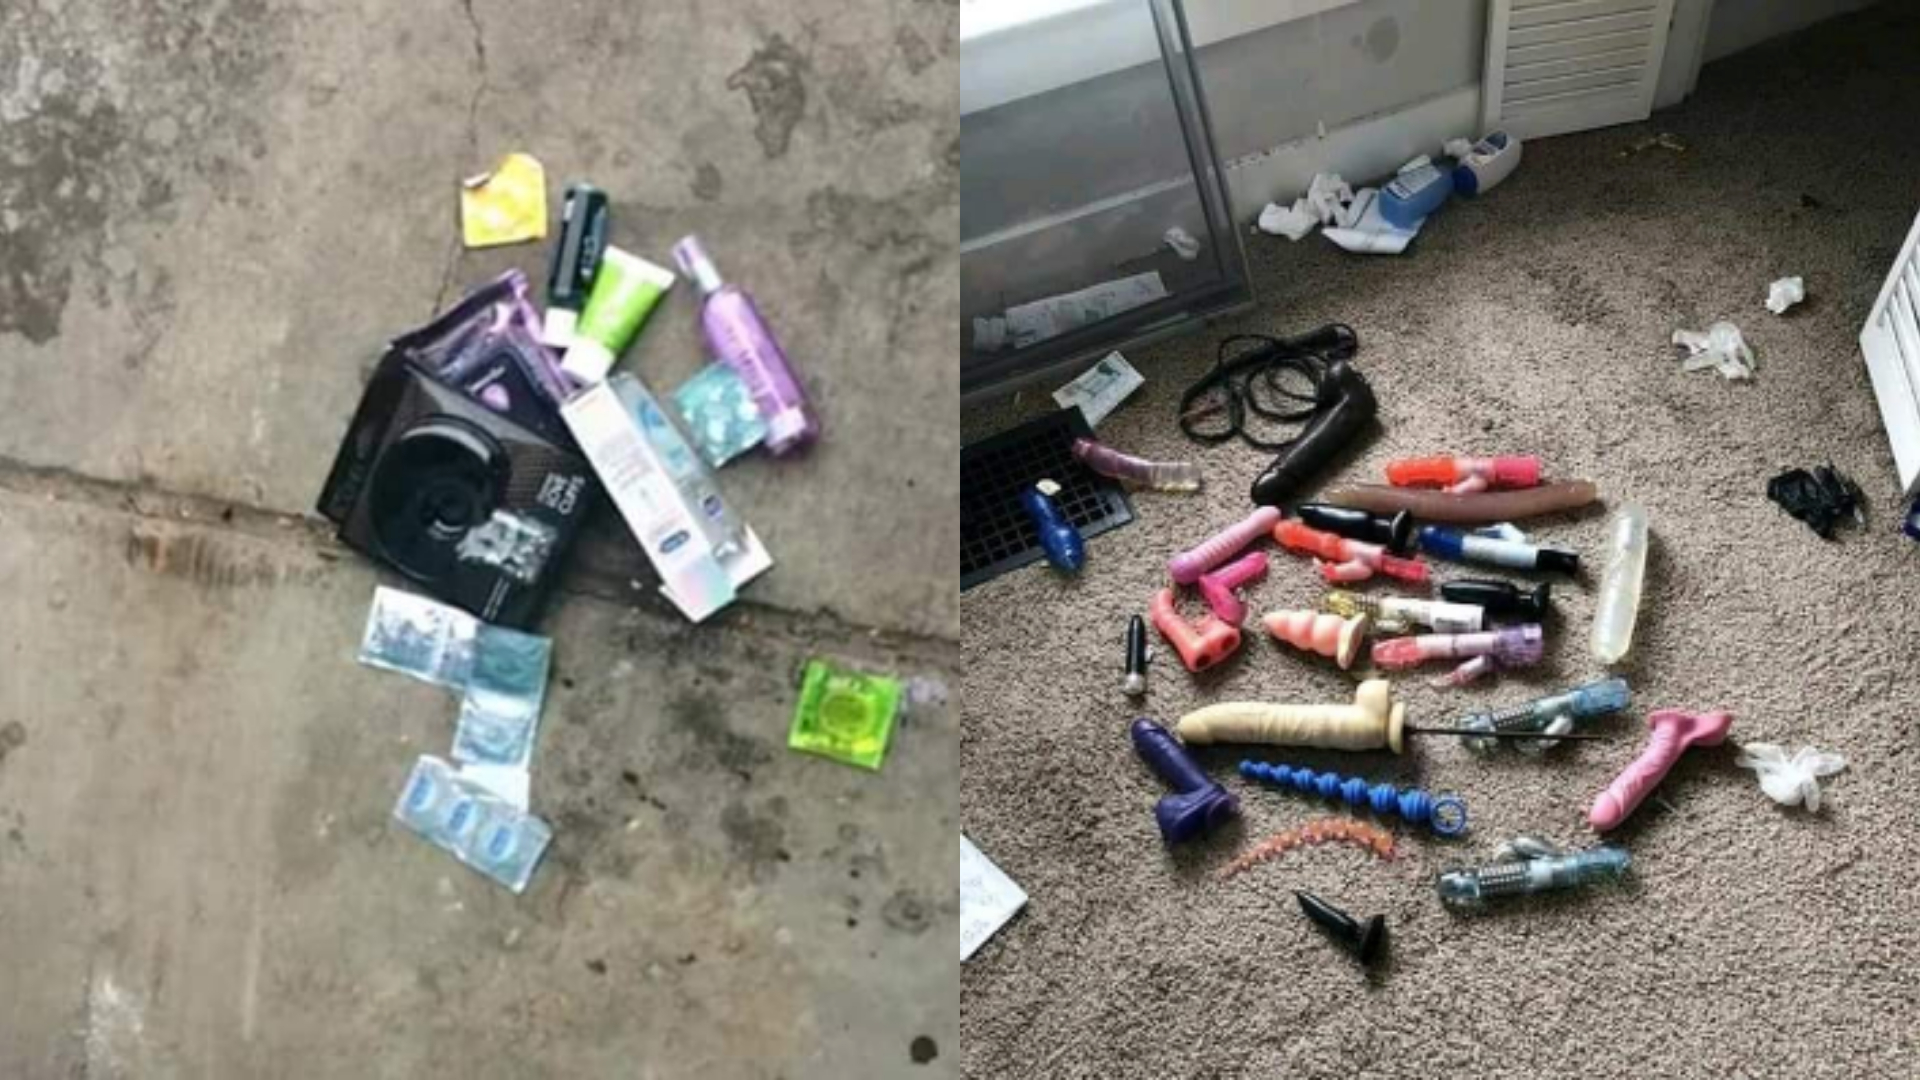 Trolls Are Sharing Photos of Sex Toys and Condoms Found at JNU. They're  Fake But Even if They Weren't, Who Cares?